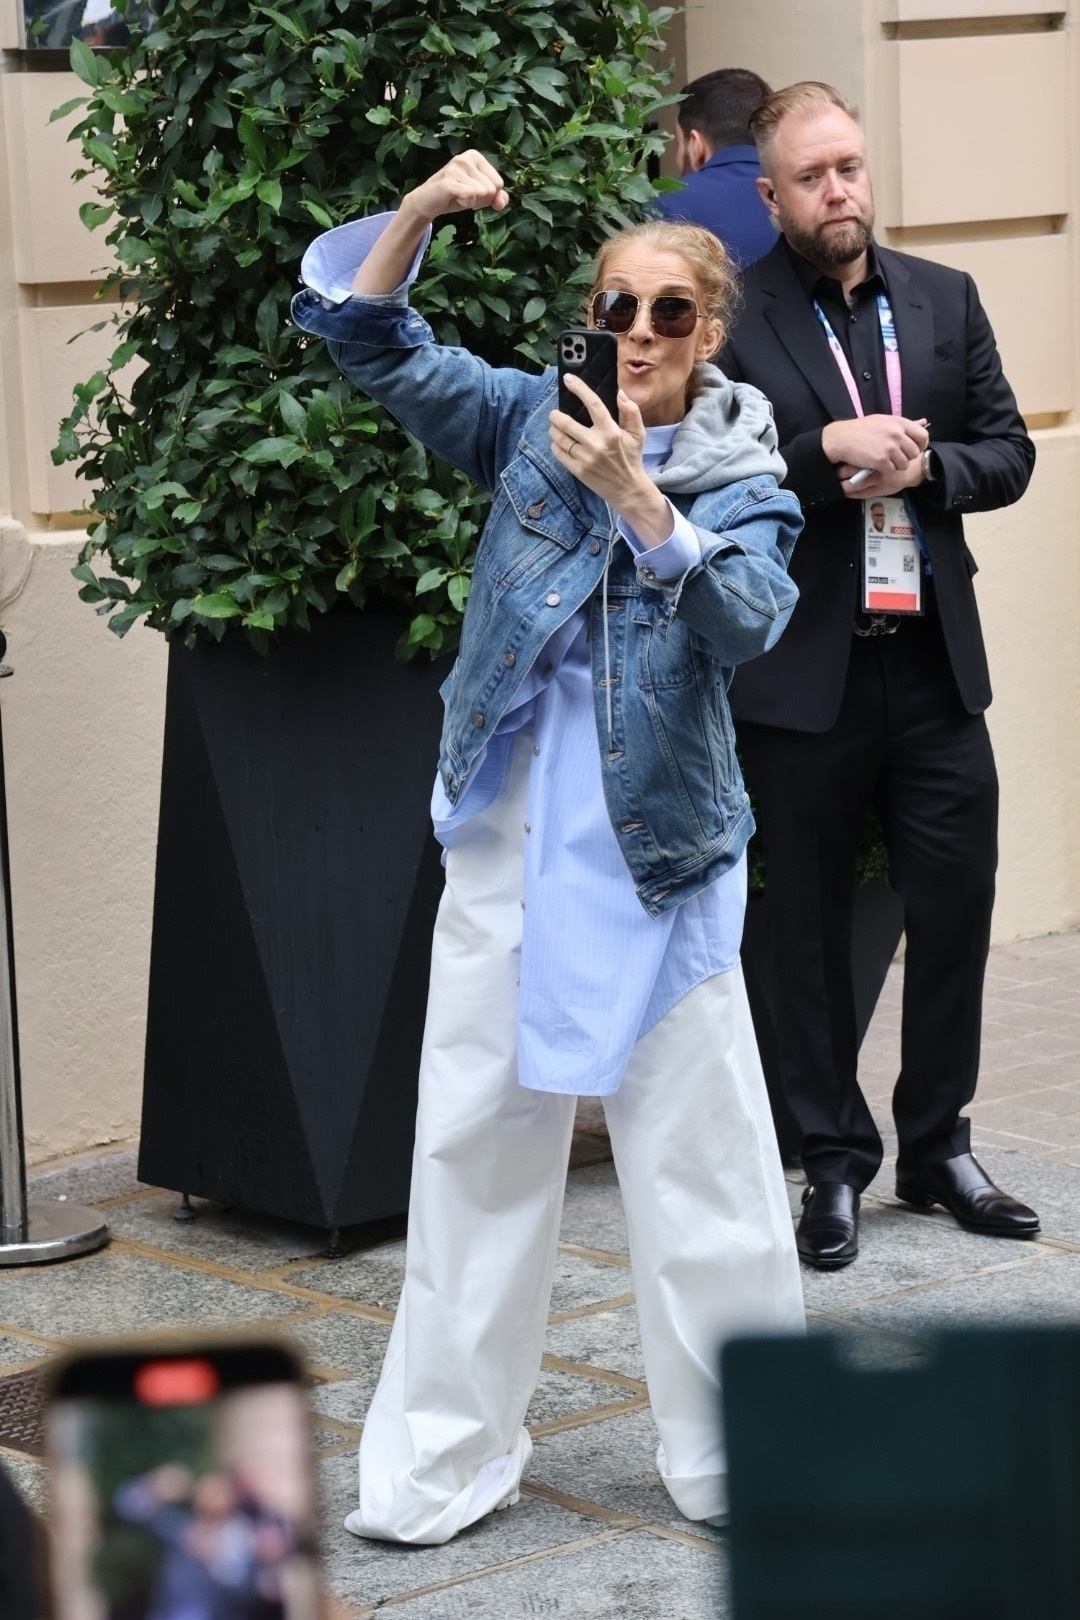 Before heading to the ceremony, Celine Dion took pictures with fans and received cheers from the crowd outside her hotel room